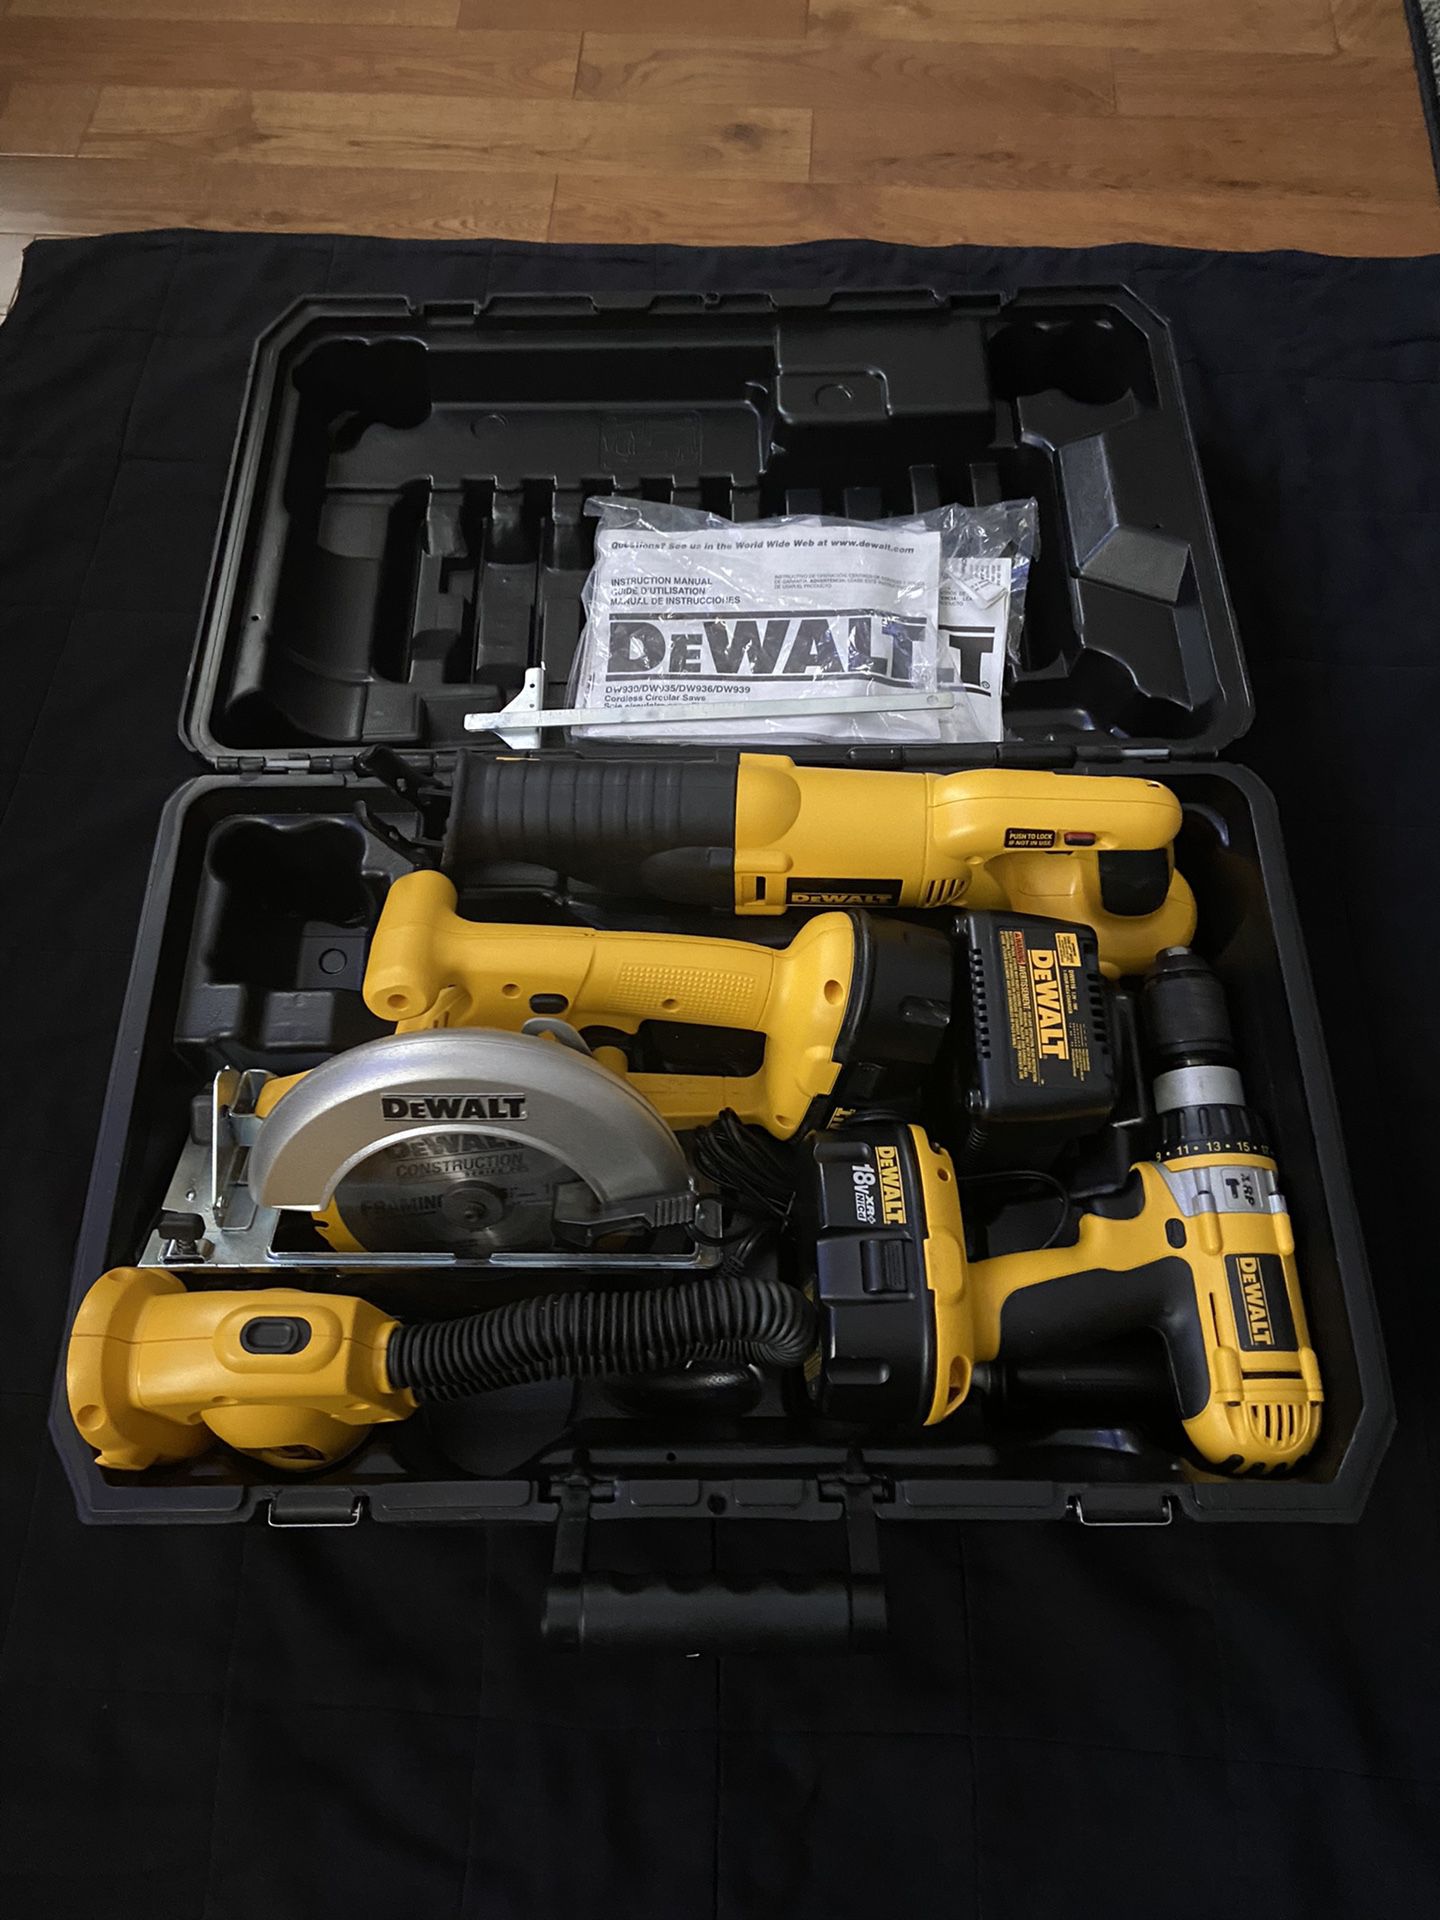 Dewalt xrp 18v 4 tool set with hard case. drill/driver/hammer drill (like new)